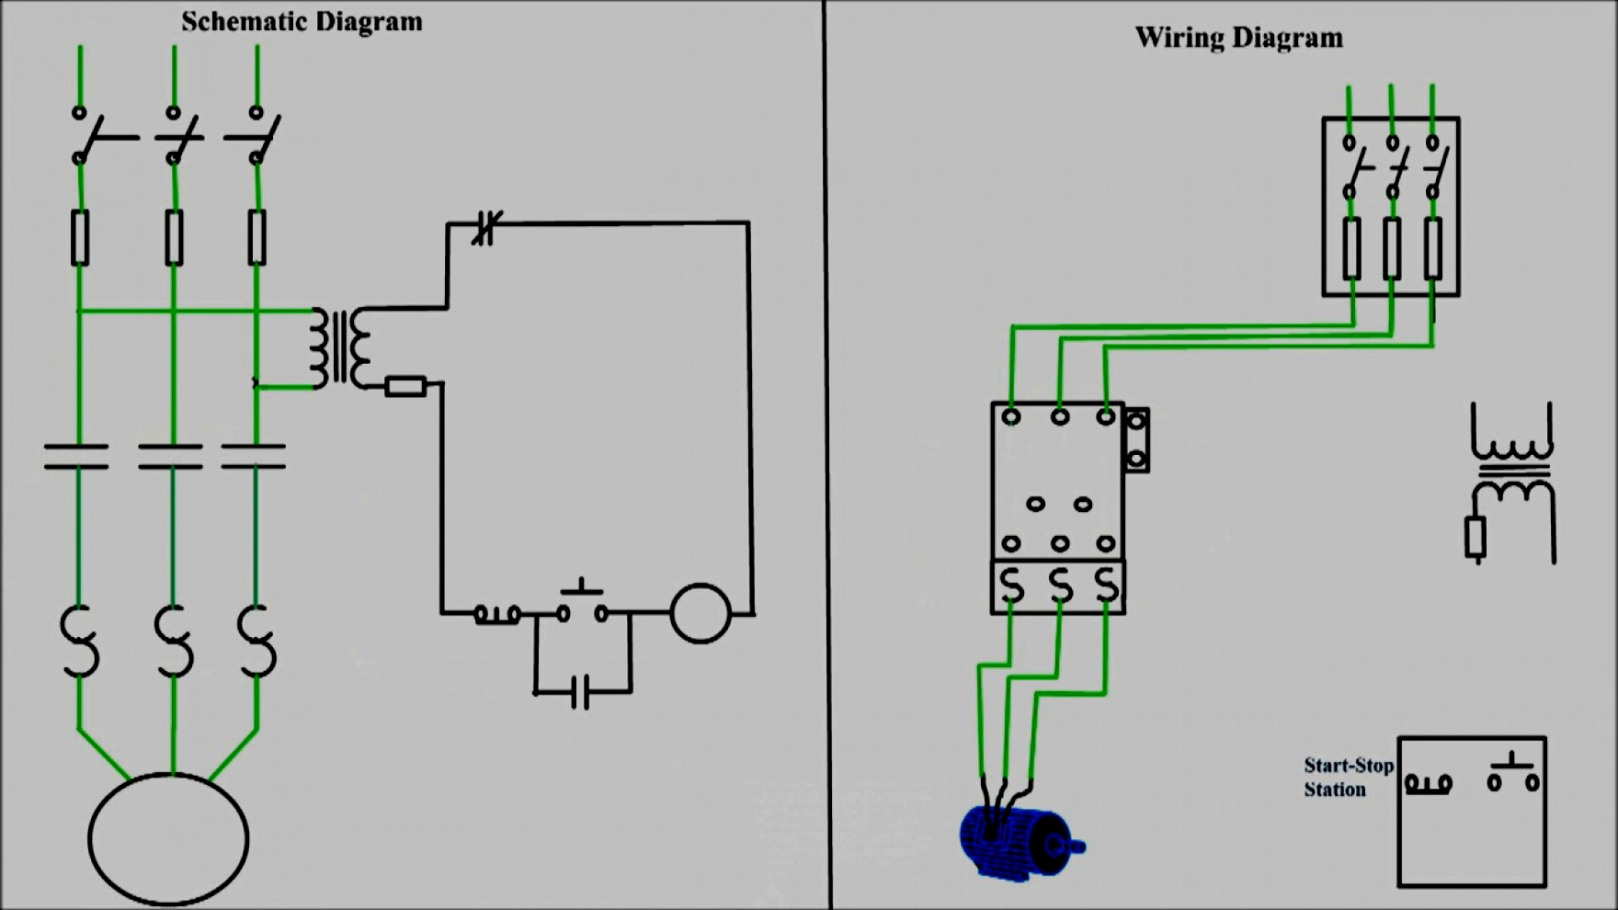 New Of Push Button Start Wiring Diagram Multiple Stations Three Wire - Motor Starter Wiring Diagram Start Stop